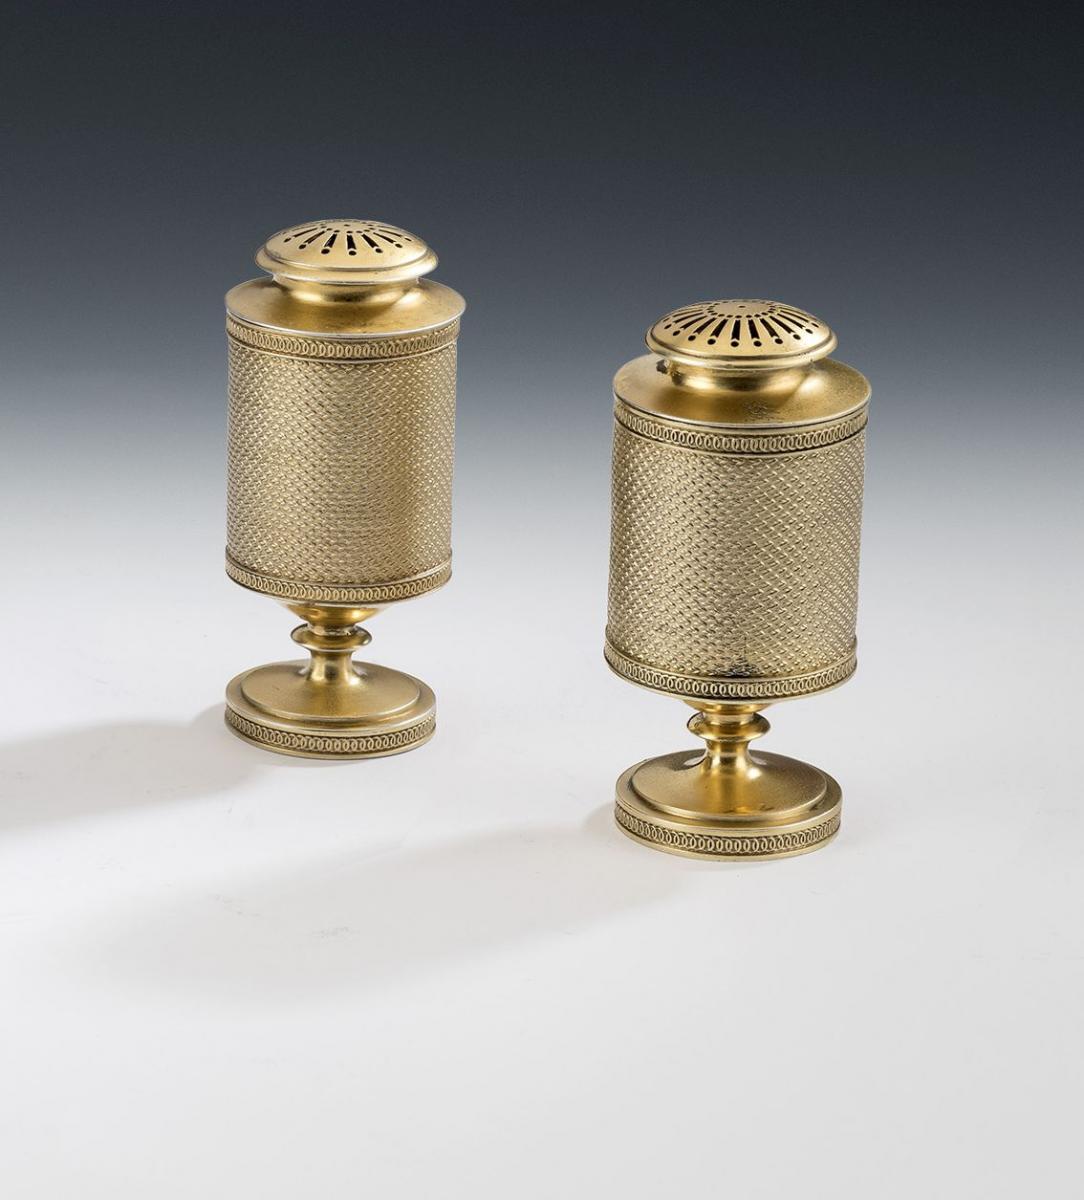 An Extremely Rare Pair of George III Silver Gilt Pepper Casters made in London in 1805 by John Emes